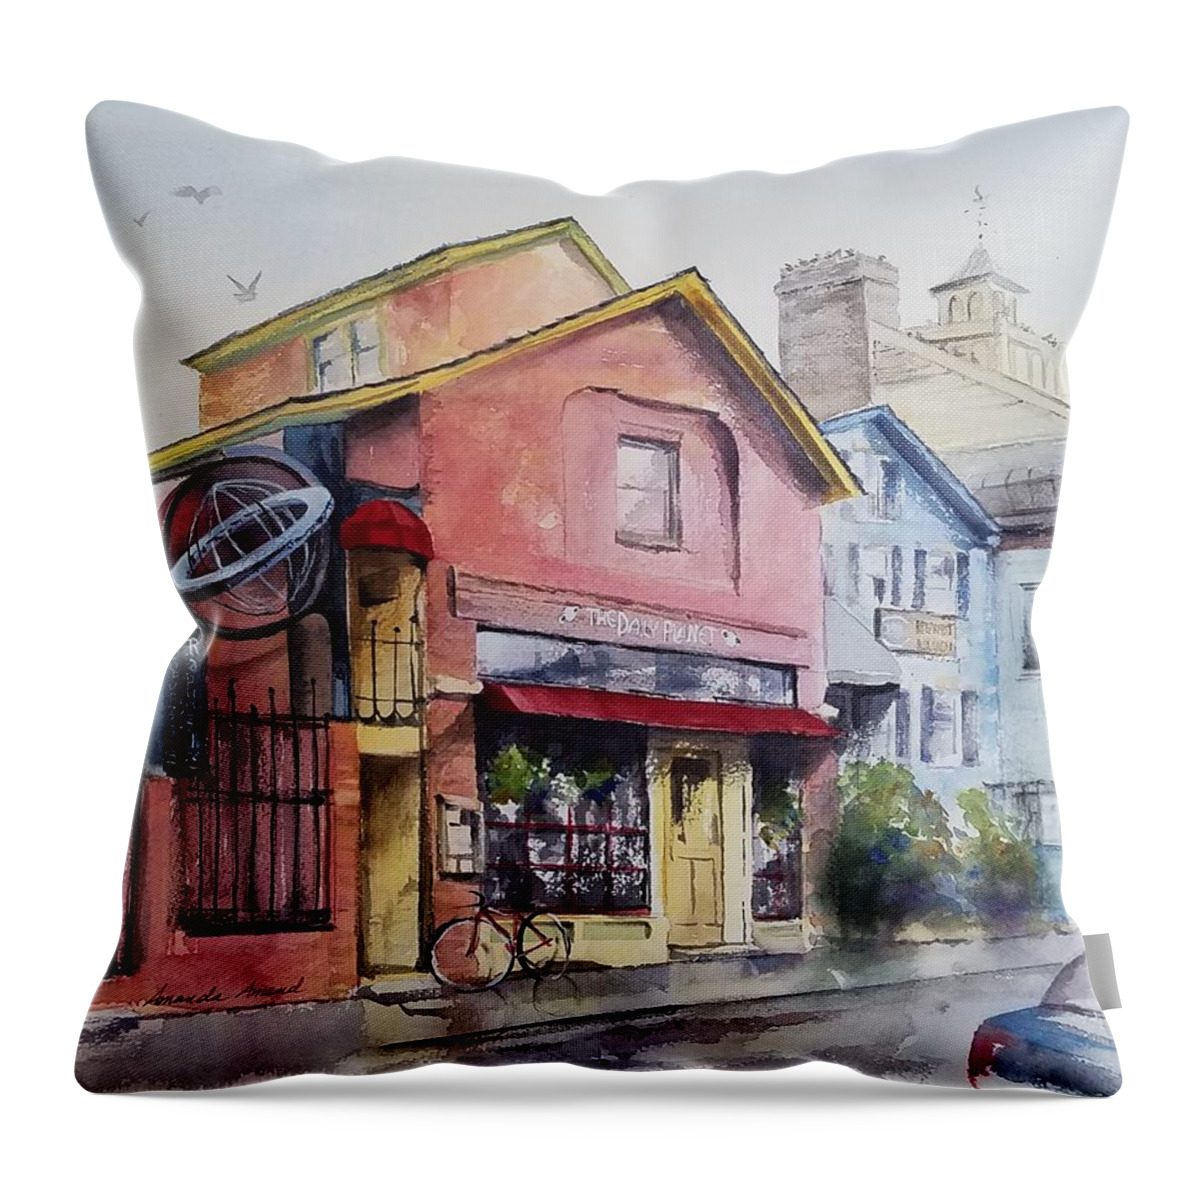 Burlington Throw Pillow featuring the painting The Daily Planet by Amanda Amend